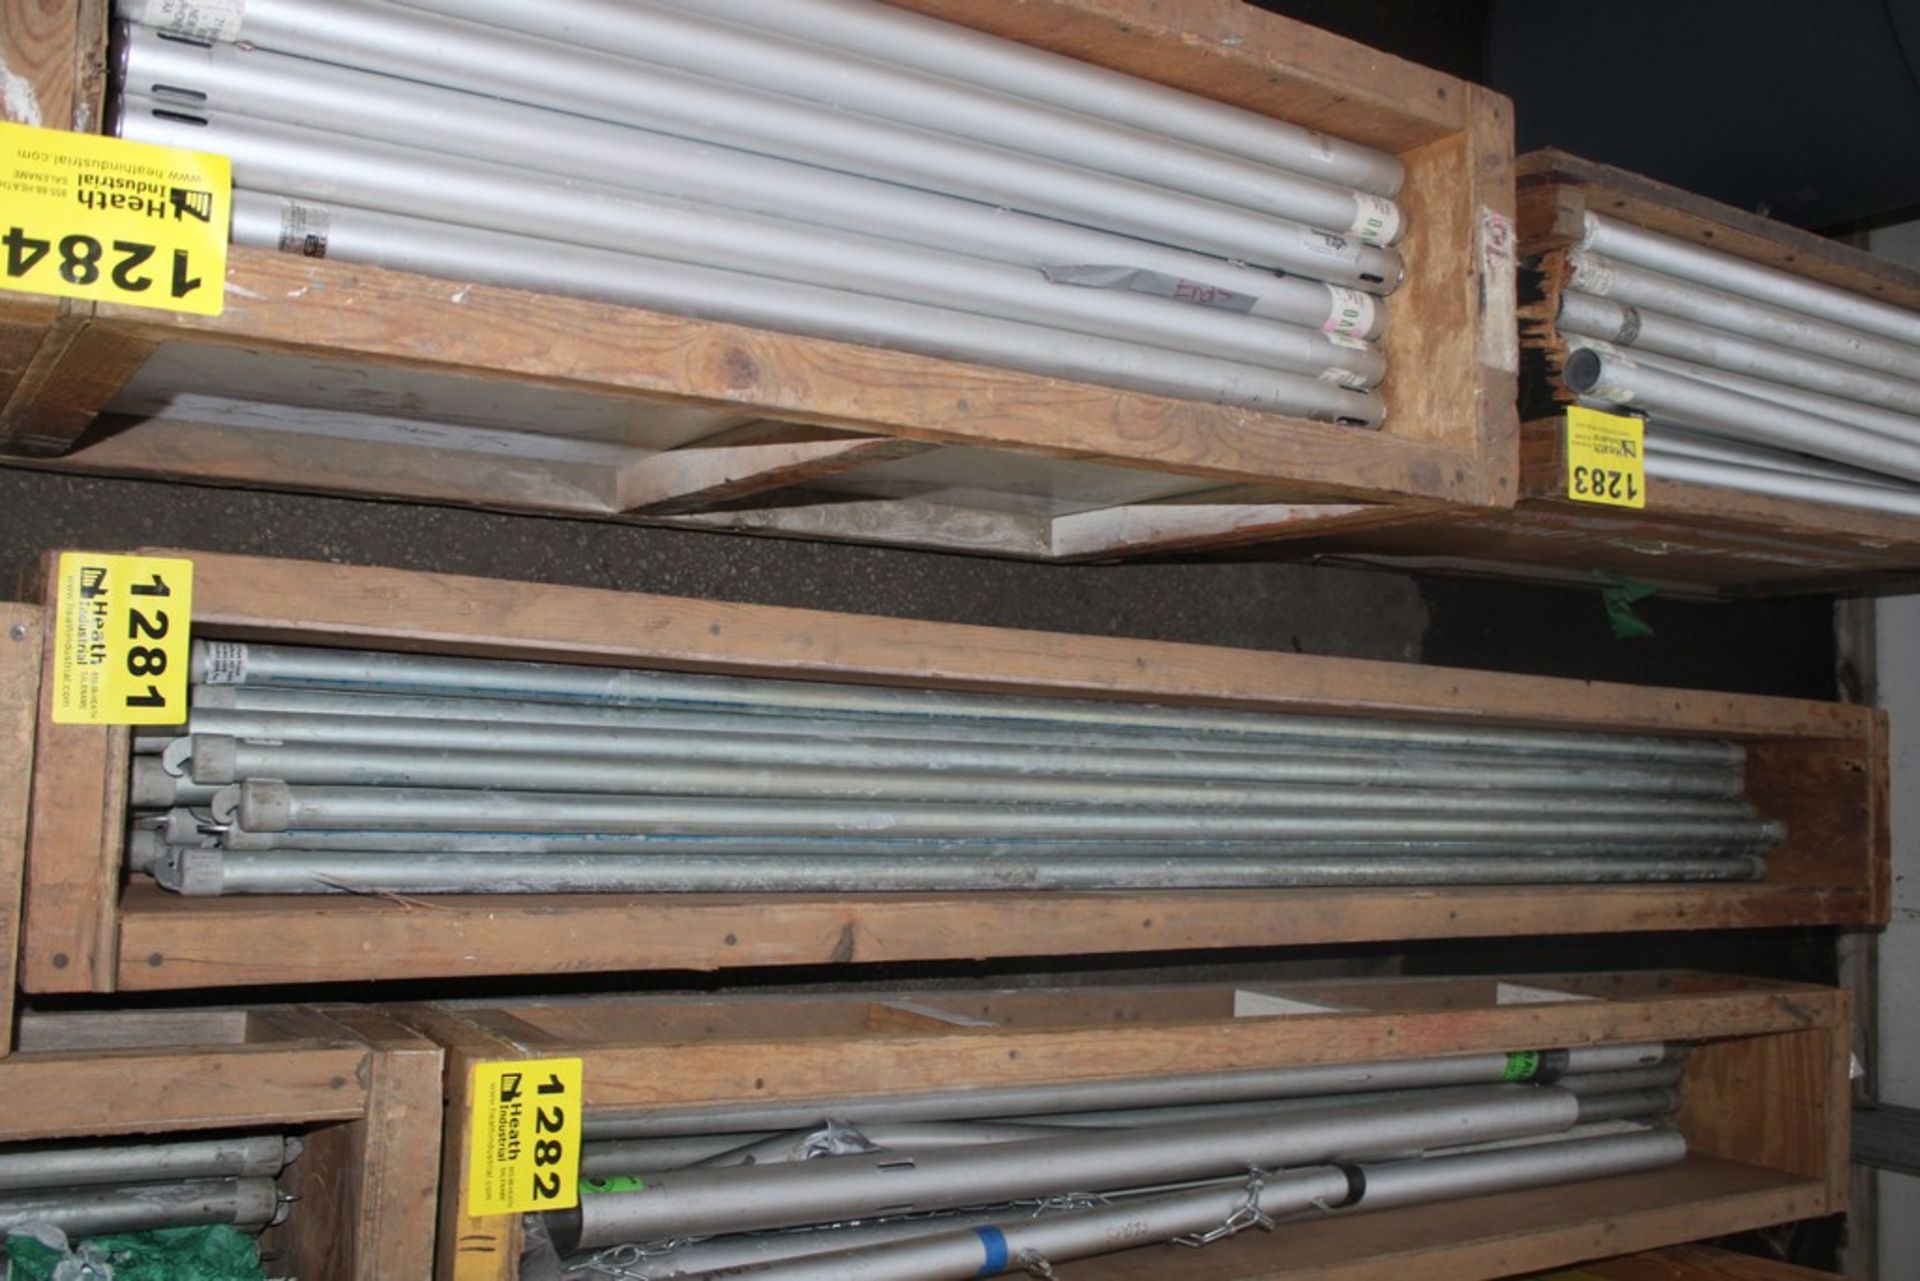 LARGE QUANTITY OF 6FT PIPE AND DRAPE RAILS IN CRATE